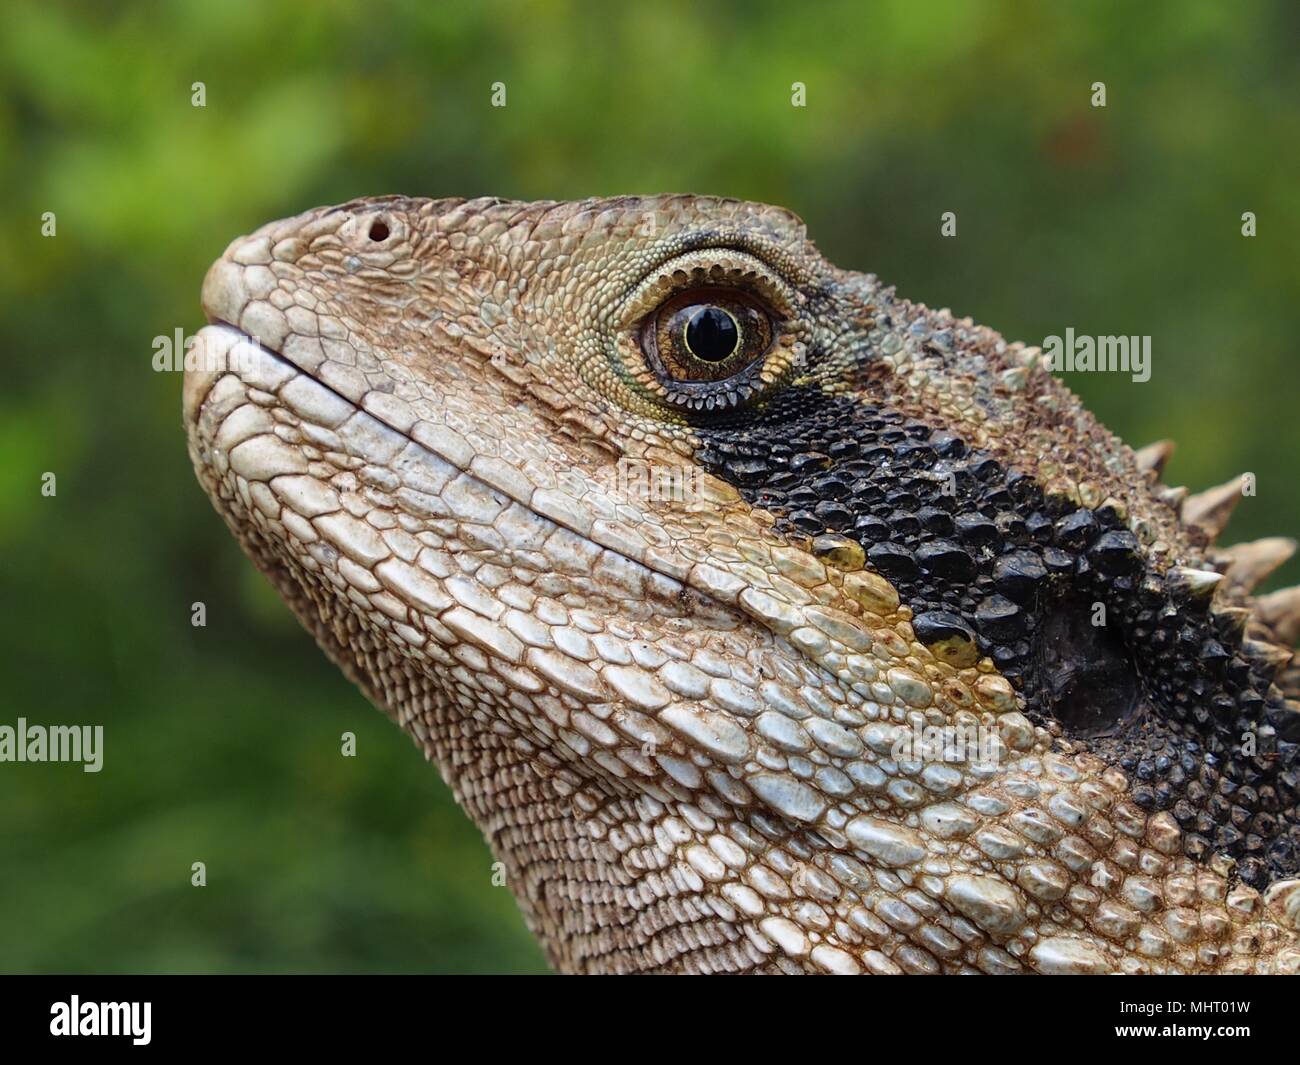 Handsome Confident Eastern Water Dragon in a Majestic Closeup Portrait. Stock Photo